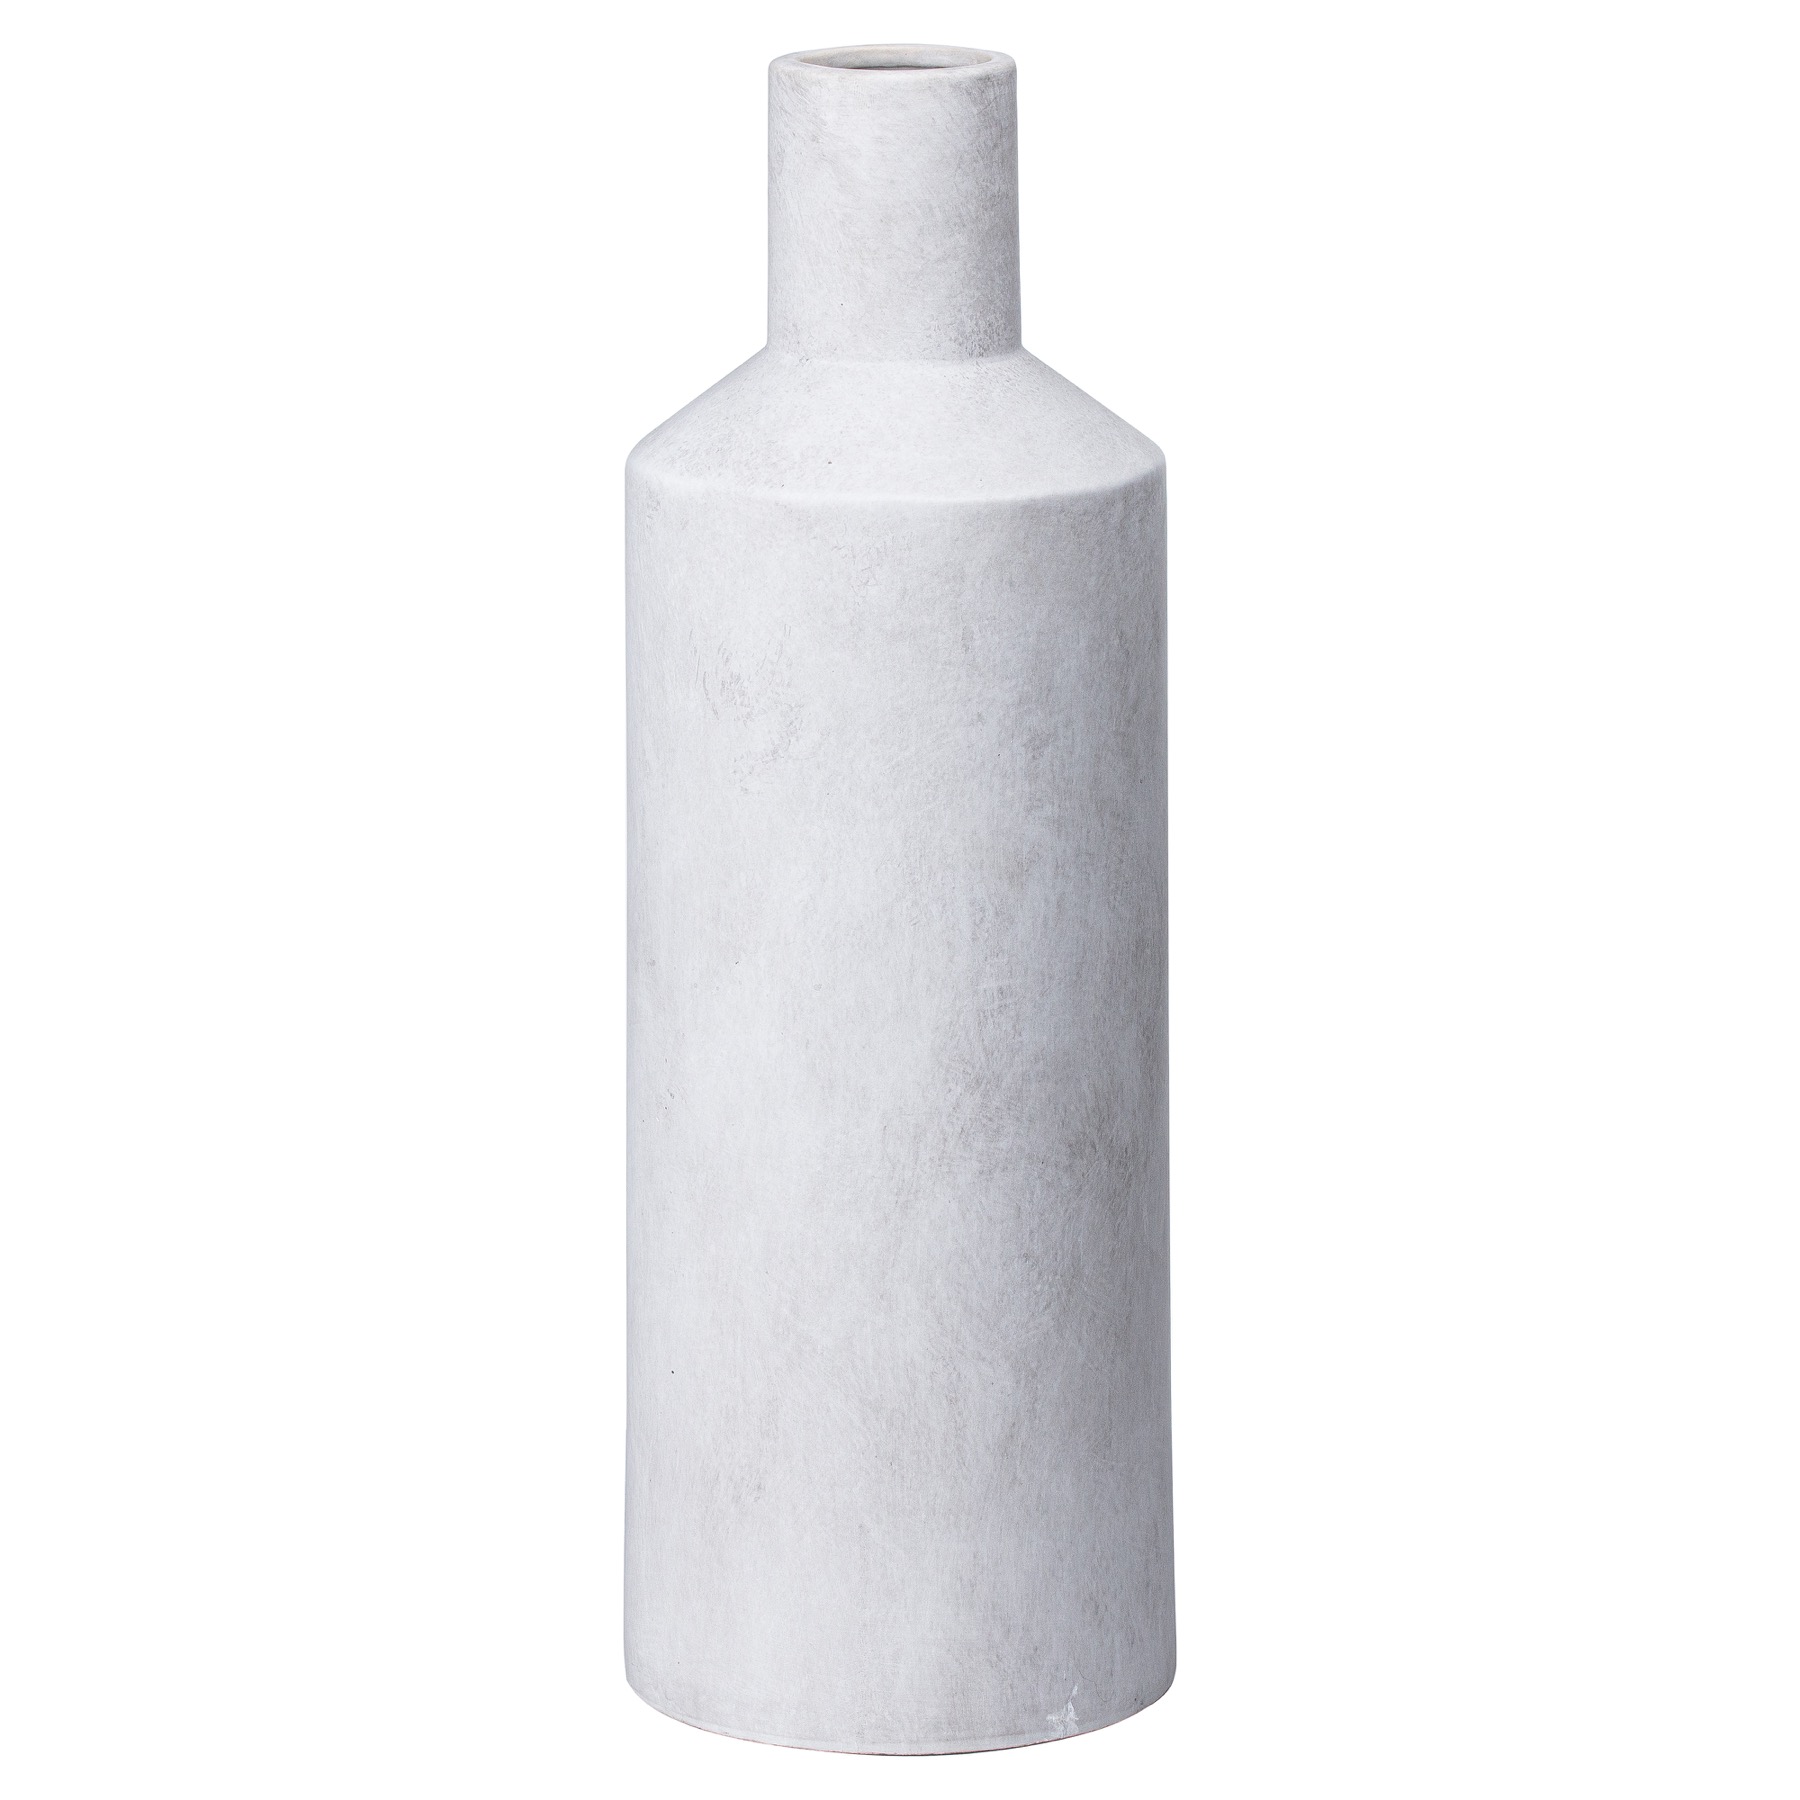 Darcy Sutra Large Vase - Image 1